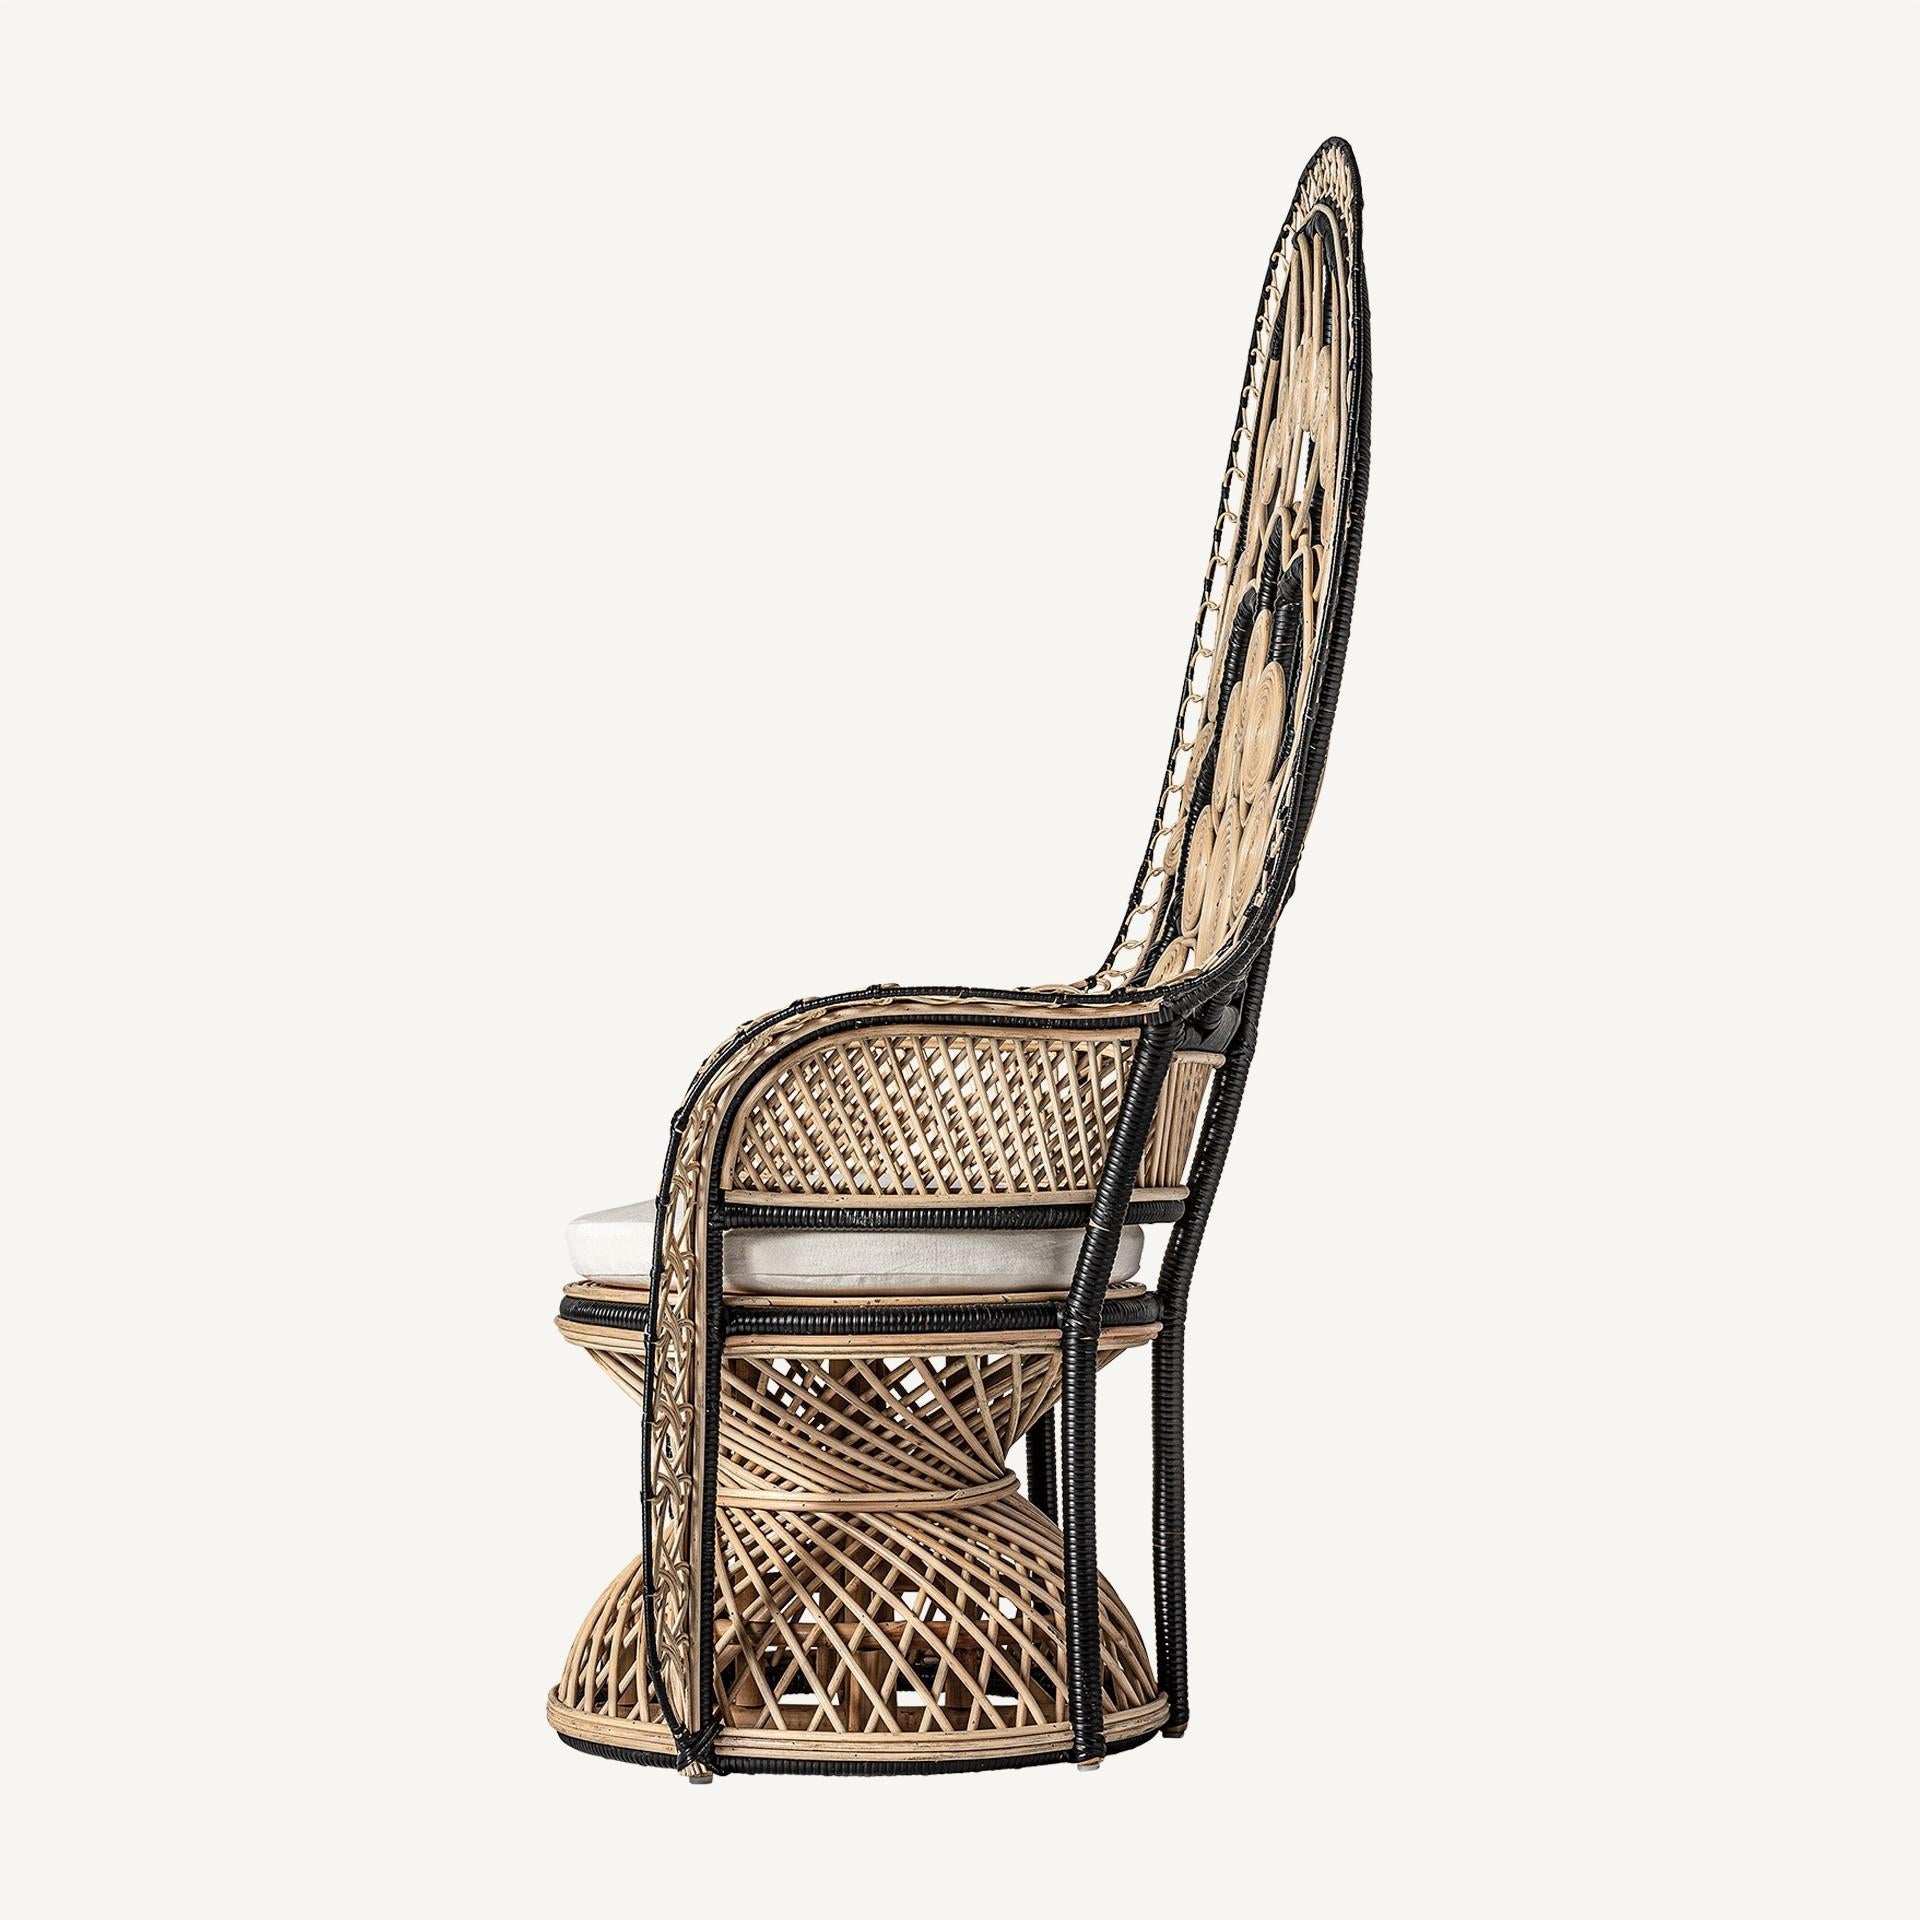 Contemporary French 1970s Design Style Handcrafted Rattan Wicker Peacock Emmanuelle Armchair